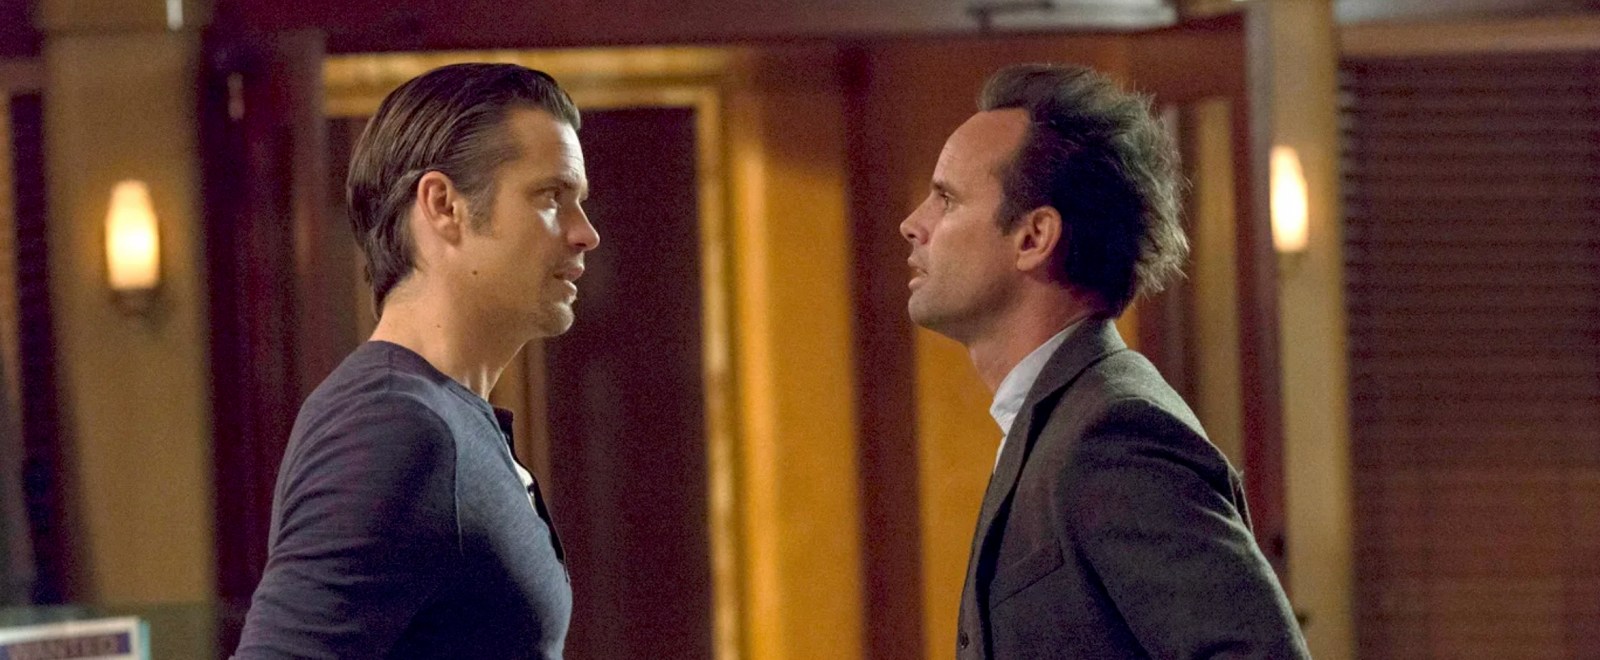 ‘Justified’ Fans Are Delighted By Timothy Olyphant And Walton Goggins’ Reunion Photo